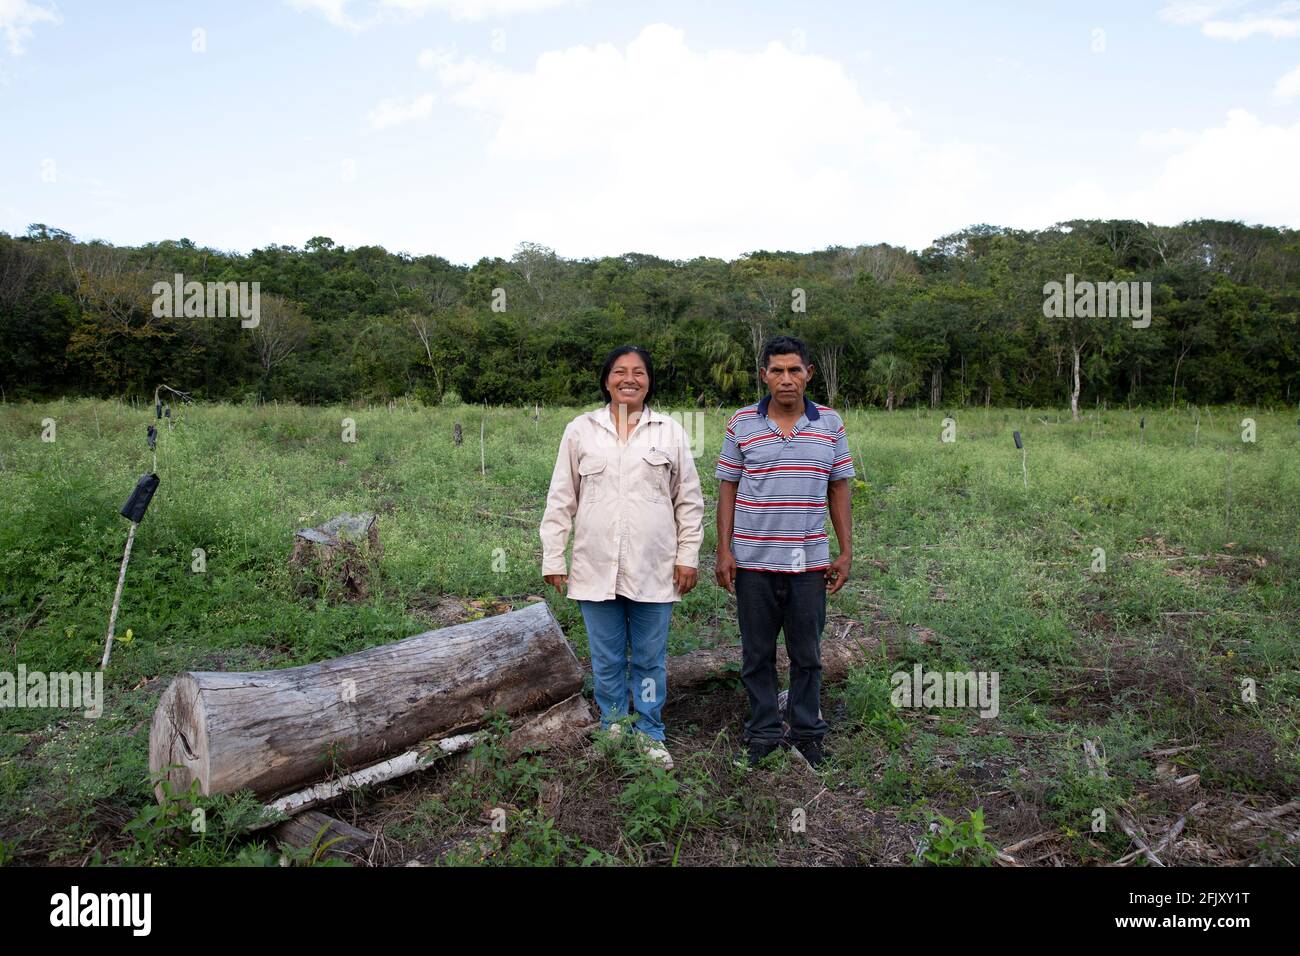 Jerónima López Hernández (L), 34, a bee-keeper, stands with her husband, Germán Bartolo Barrios (R), 52, on their rented farmland outside the village of Nueva Vida in the UNESCO-protected in Calakmul Biosphere Reserve (in Spanish Reserva de la Biósfera de Calakmul) in the Yucatán Peninsula, Calakmul Municipality, state of Campeche, Mexico on March 2, 2021. Bartolo Barrios chopped down mature trees on this land in order to qualify for a government reforestation program. He has replanted with saplings. The couple are expecting their fifth child. “The program is a benefit for our children,” says Stock Photo